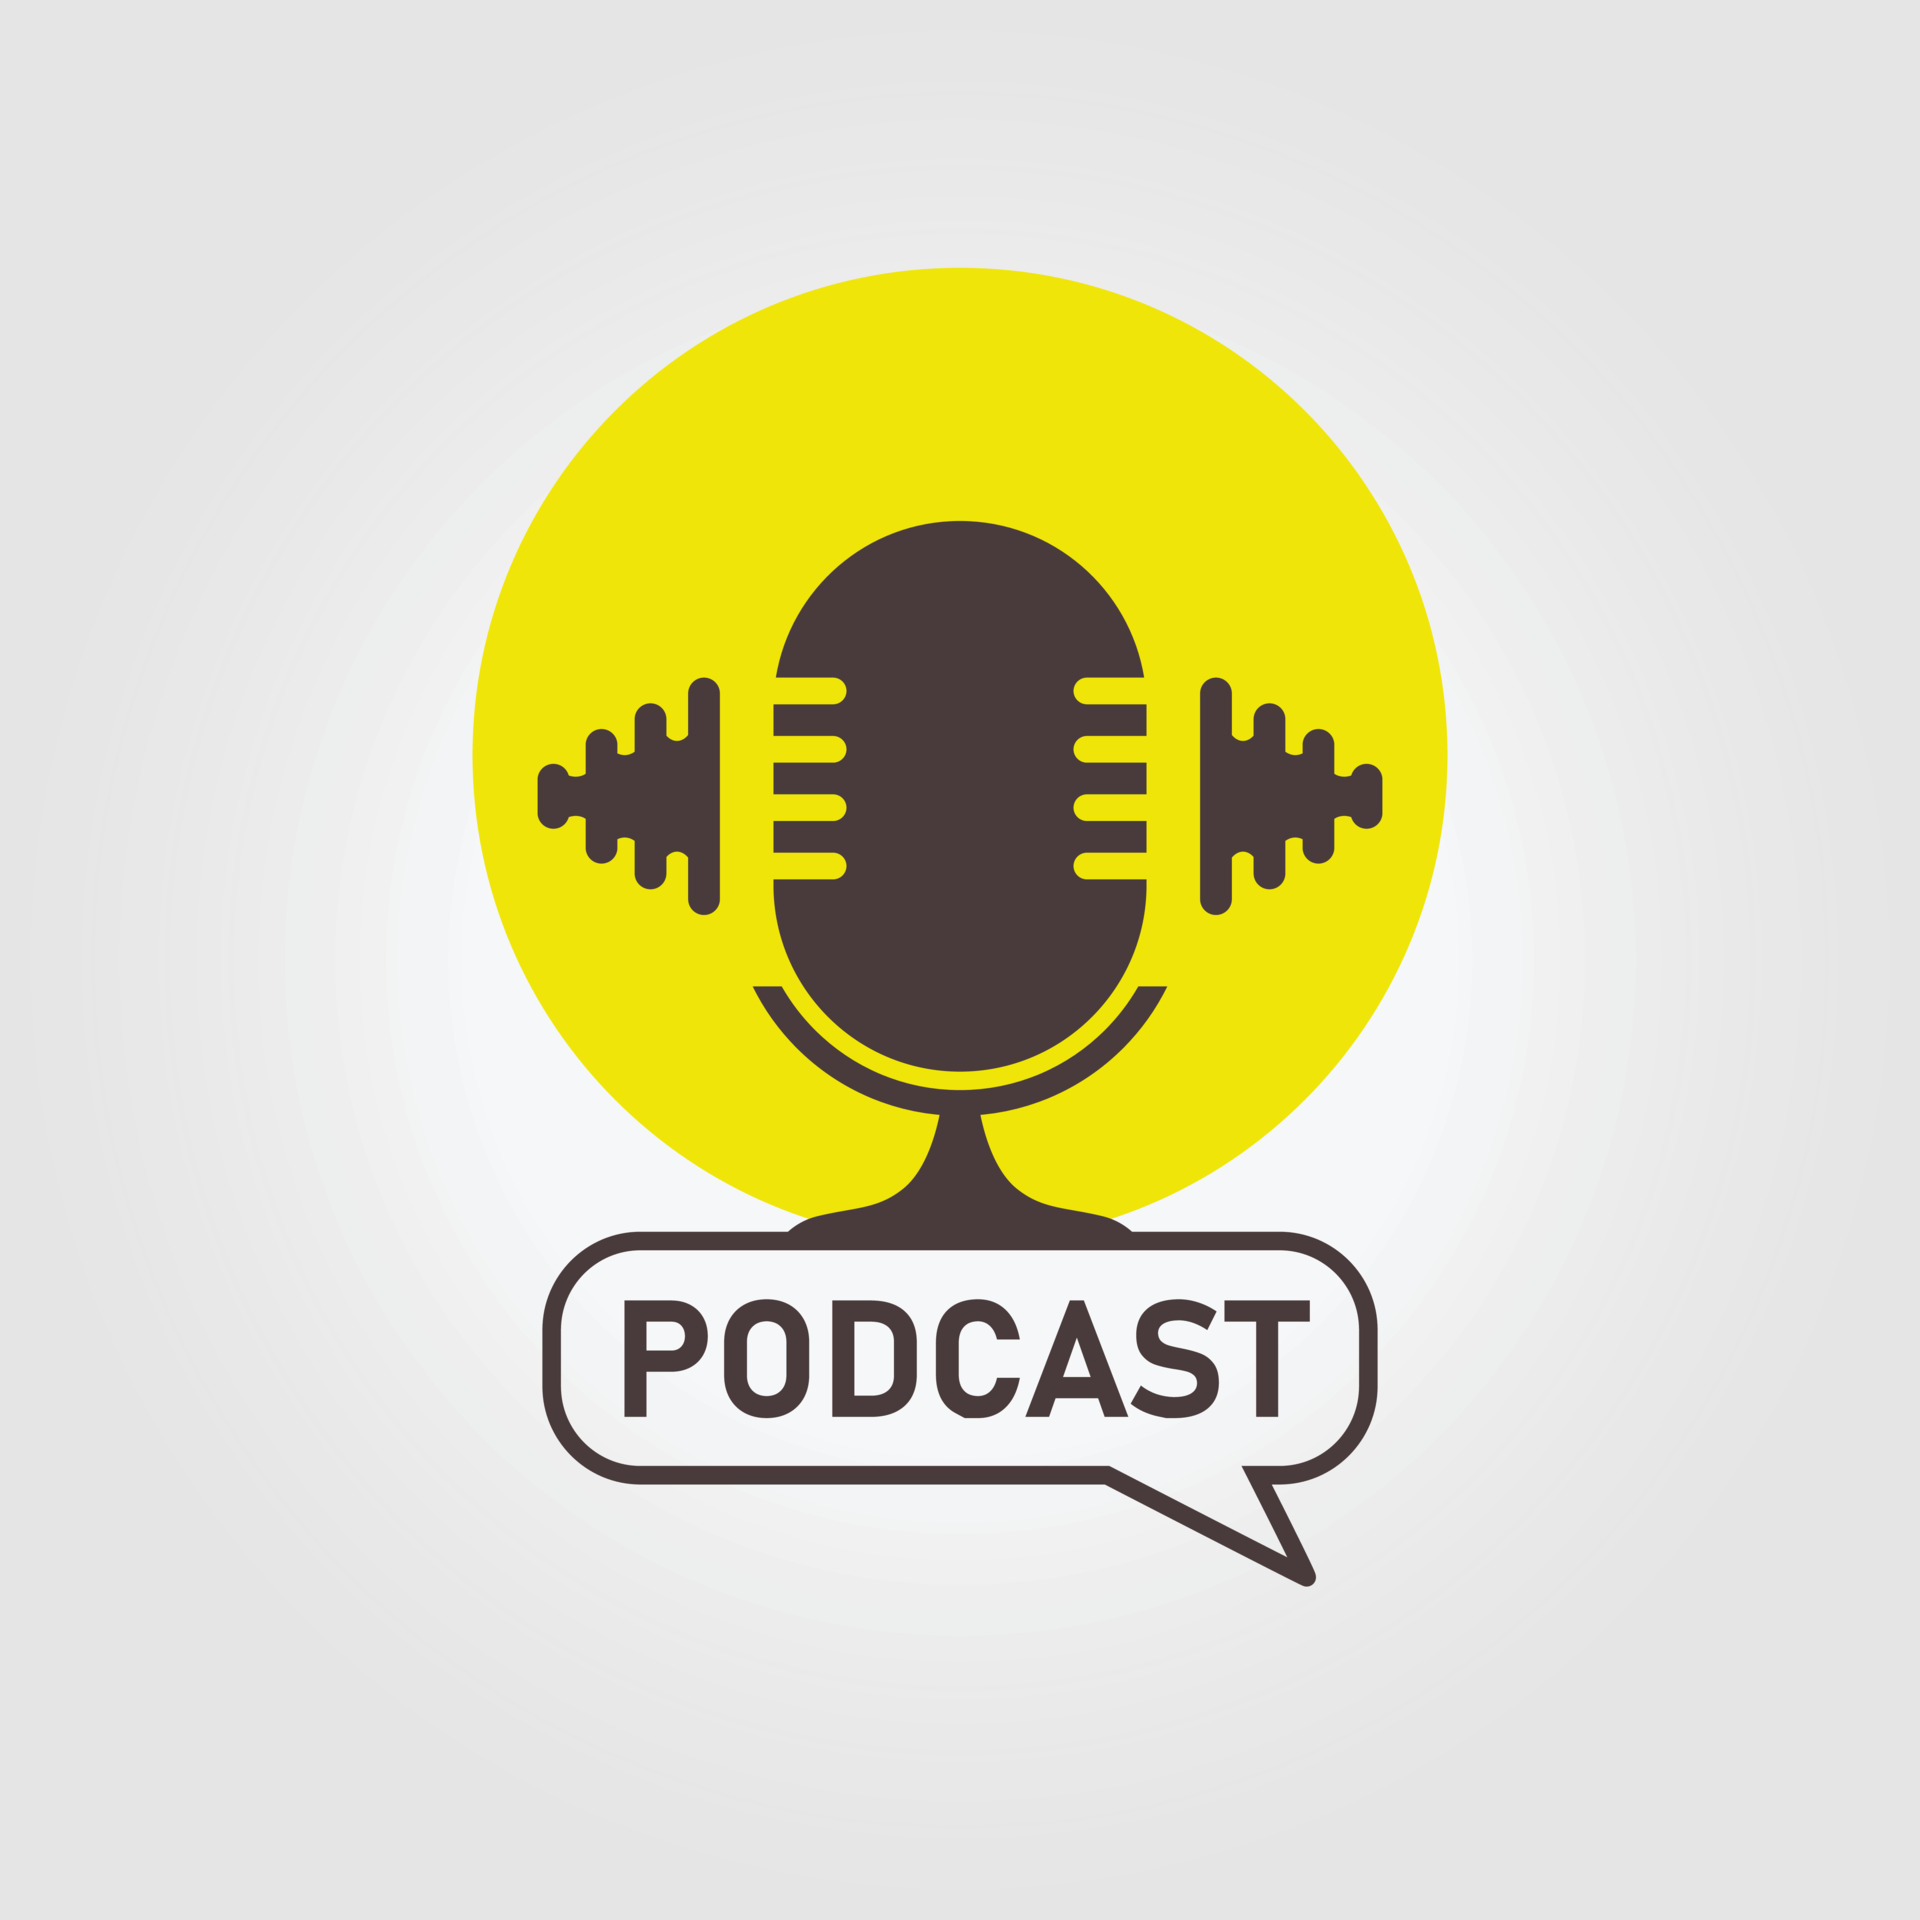 podcast logo icon design vector illustration, microphone with sound ...